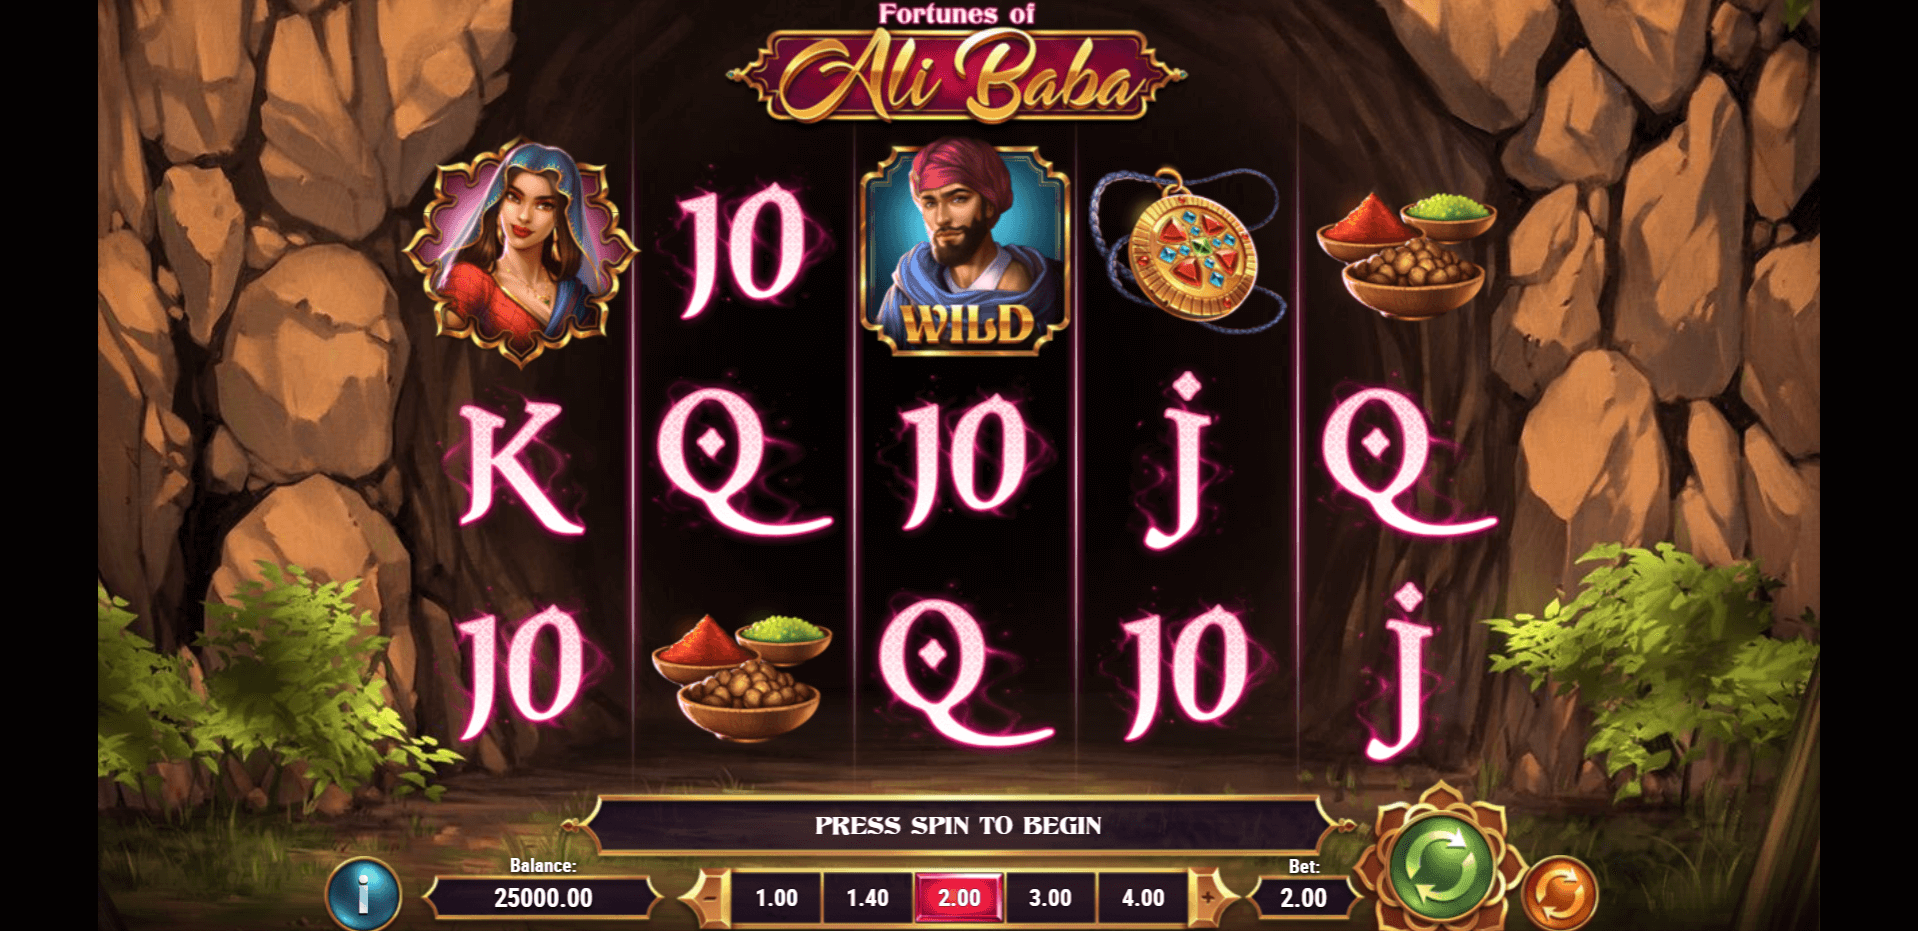 Fortunes of Alibaba Slot Machine ᗎ Play FREE Casino Game Online by Play&#39;n GO